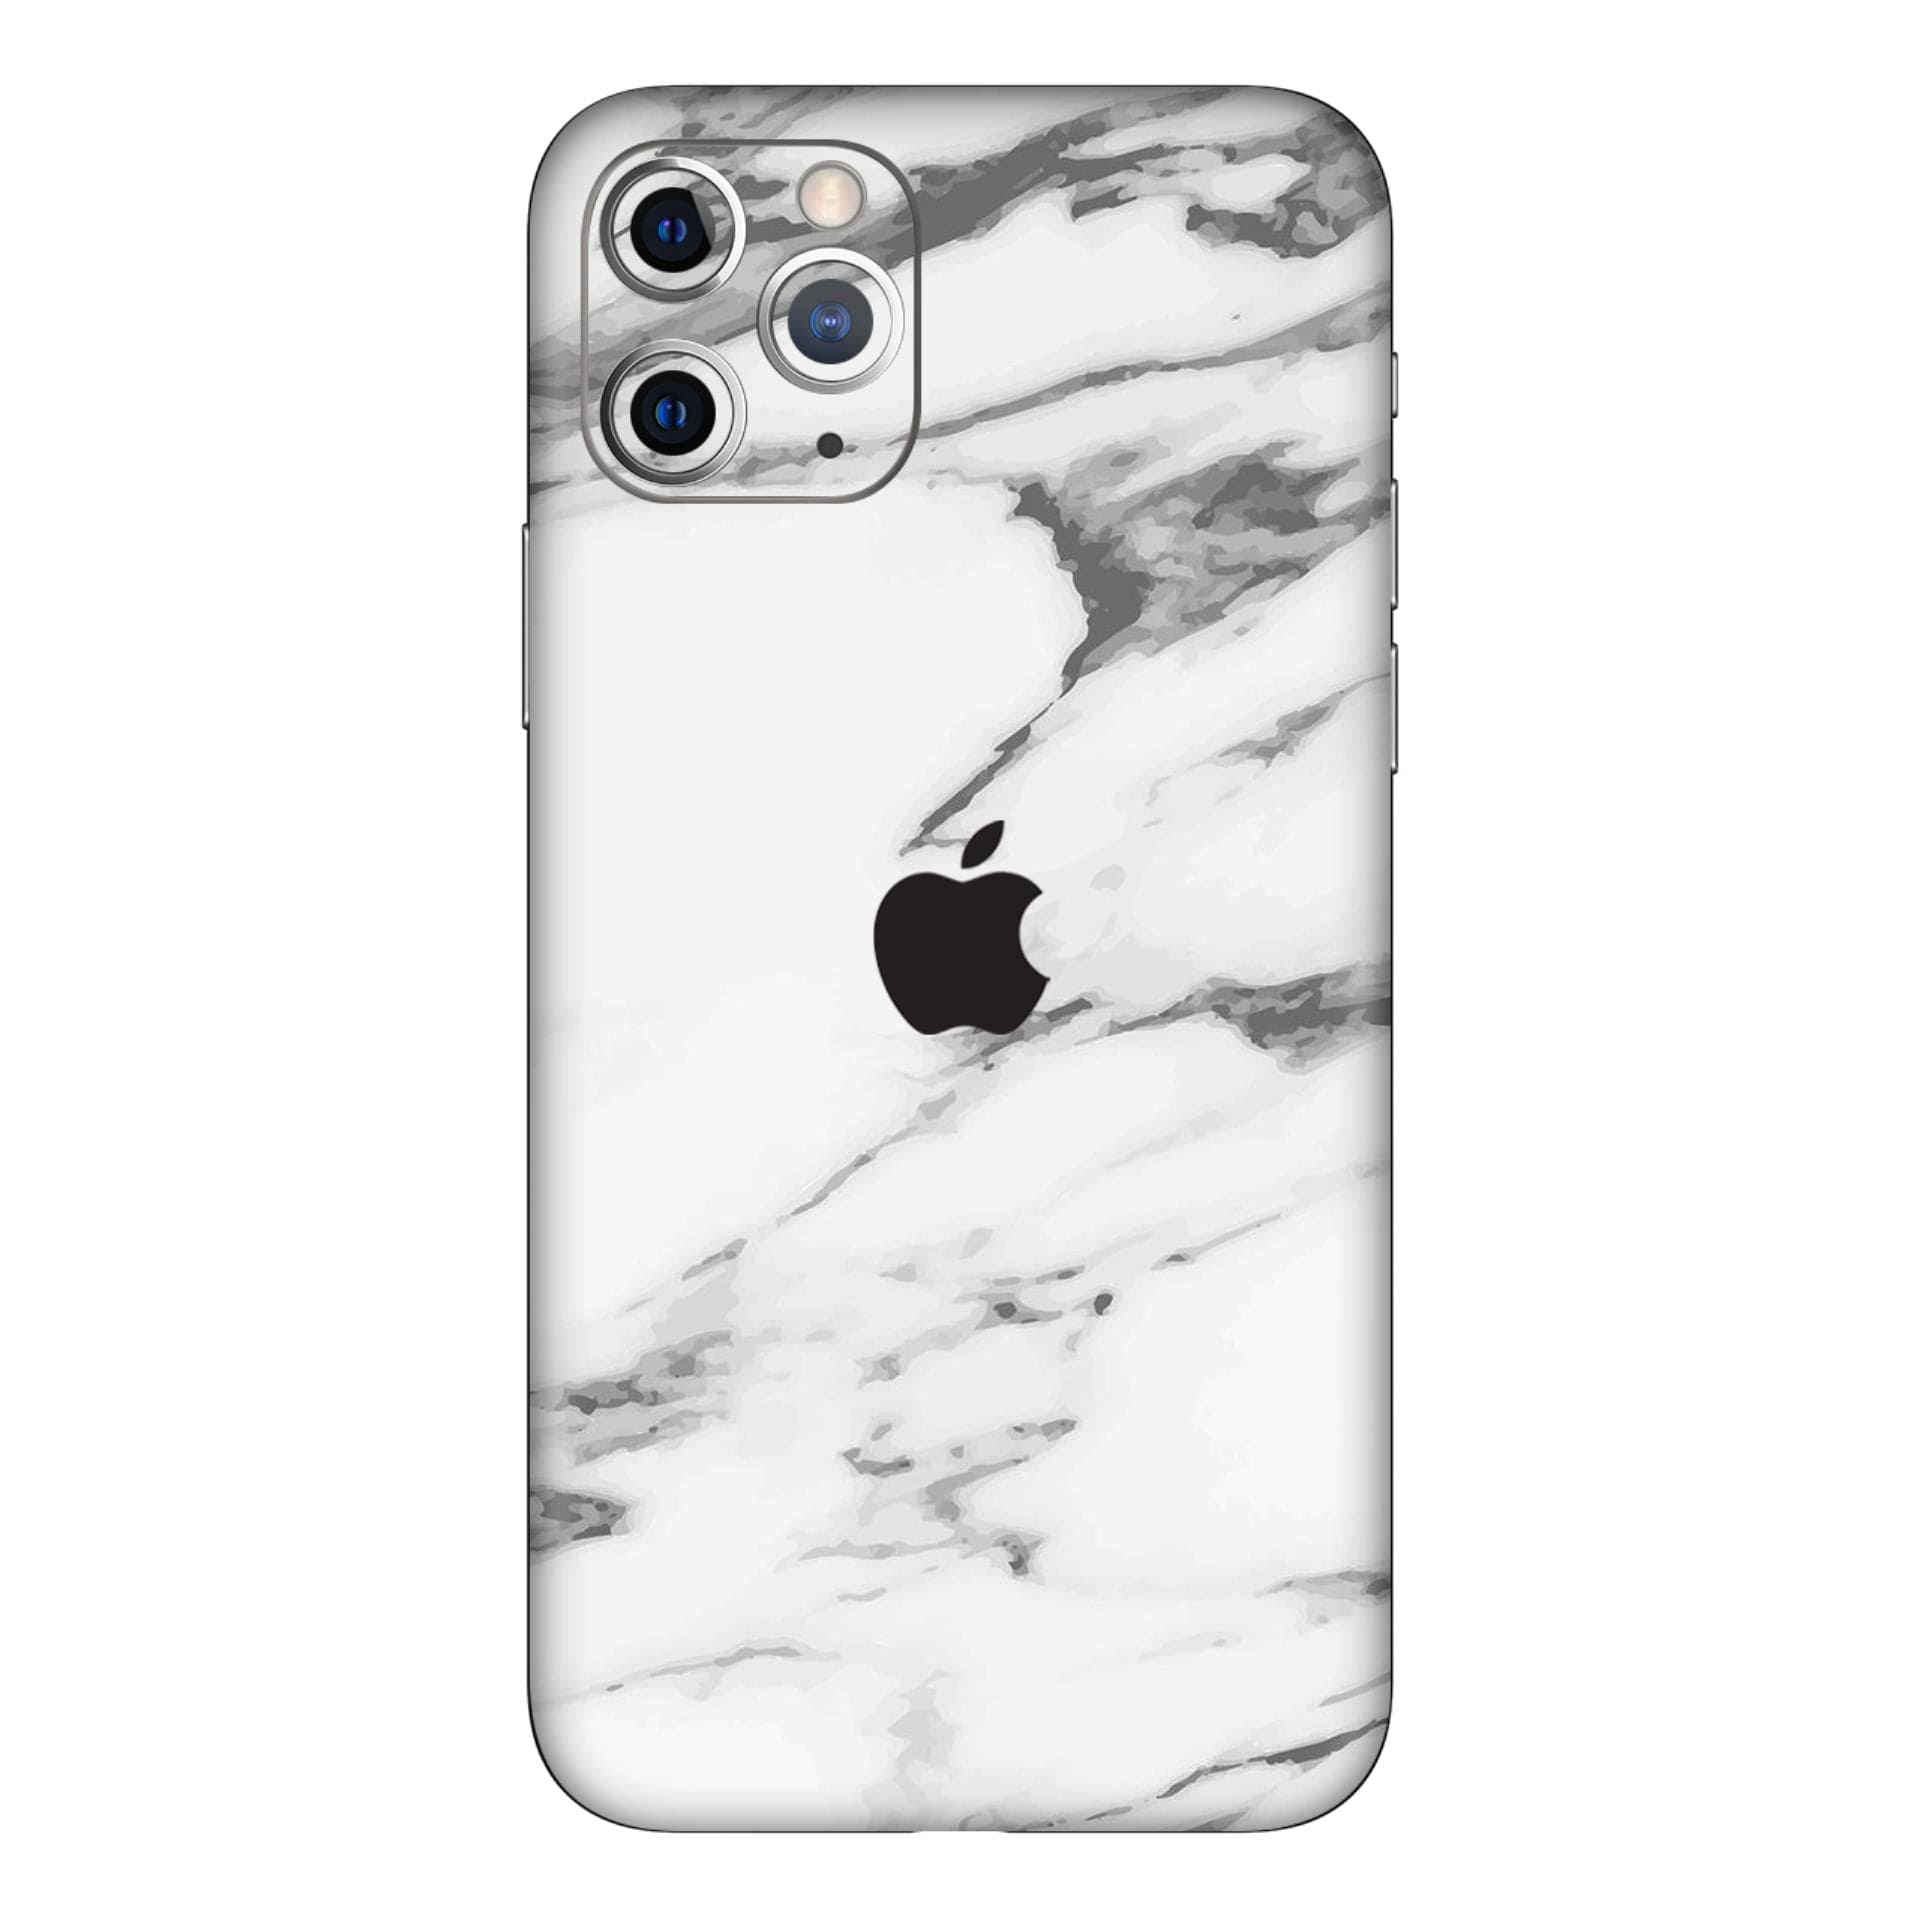 iphone 11 Pro White Marble skins